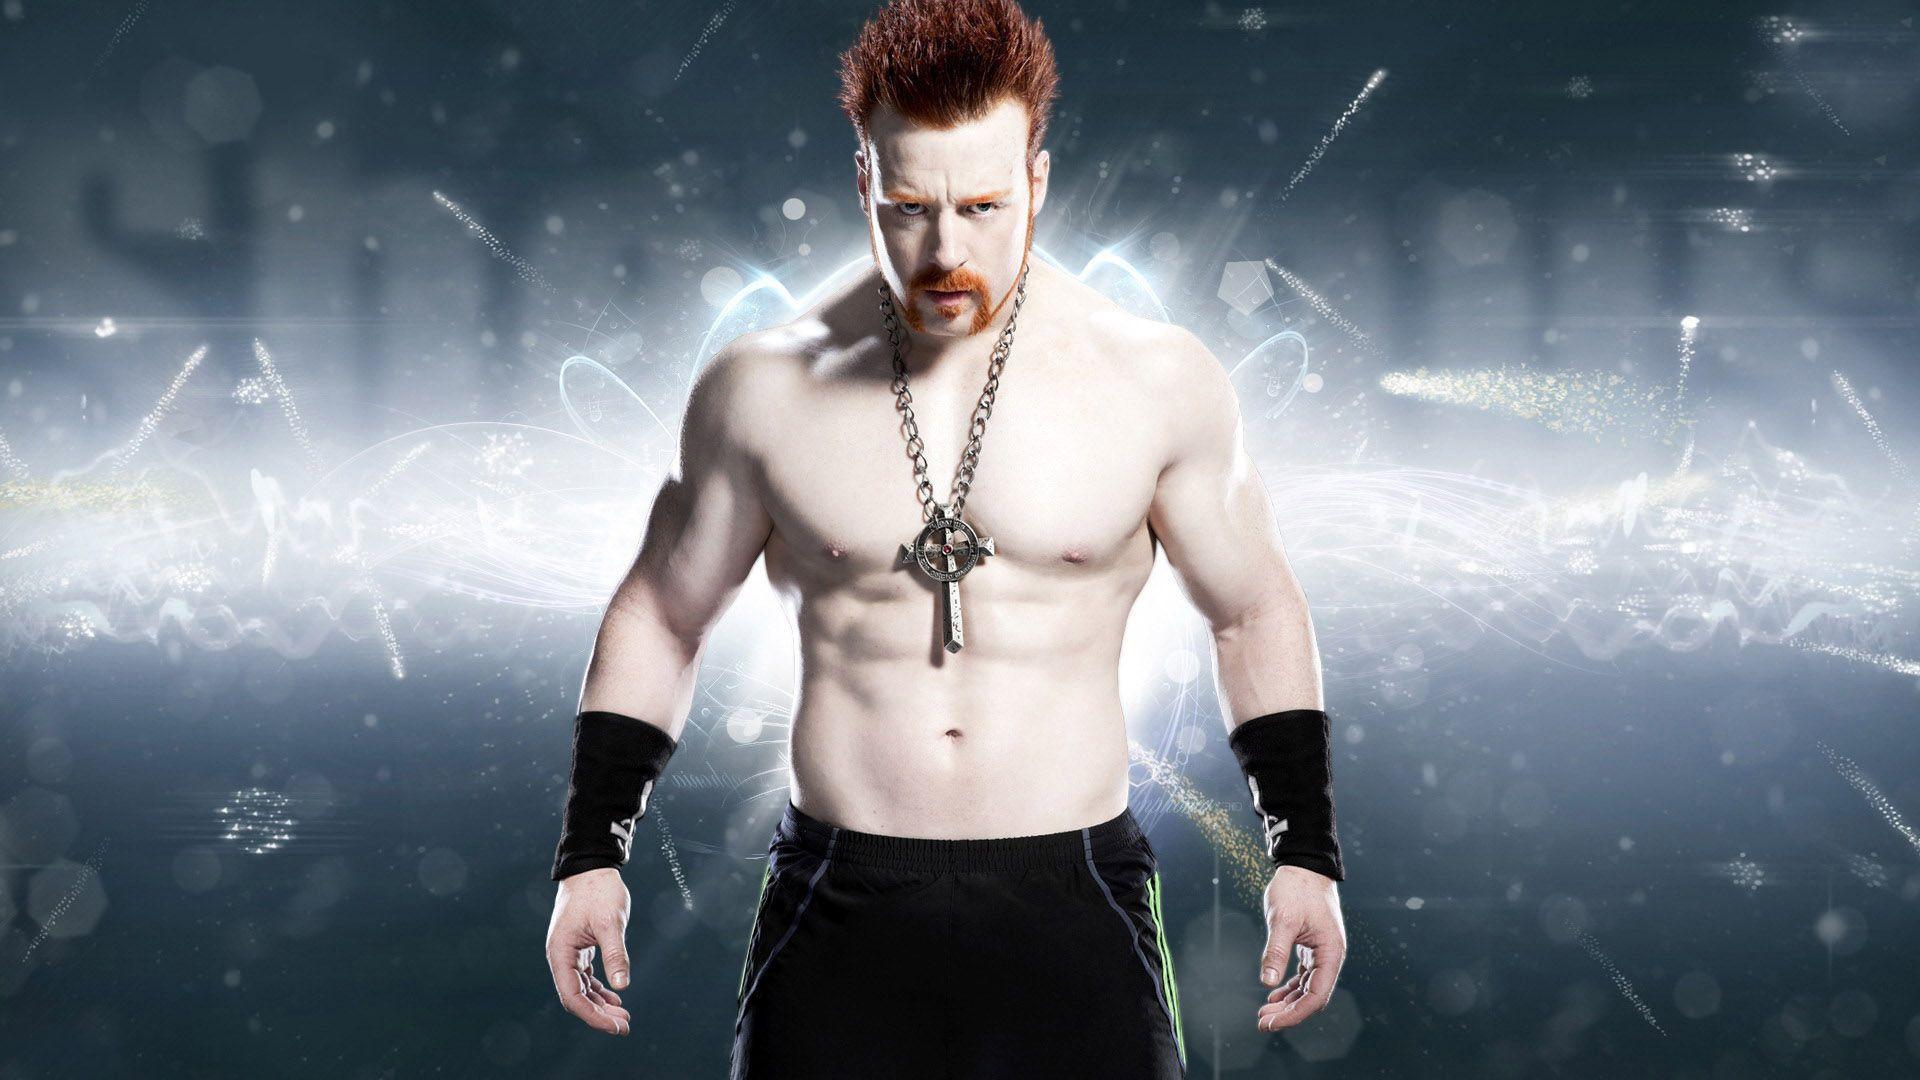 WWE Wallpaper, Picture, Image